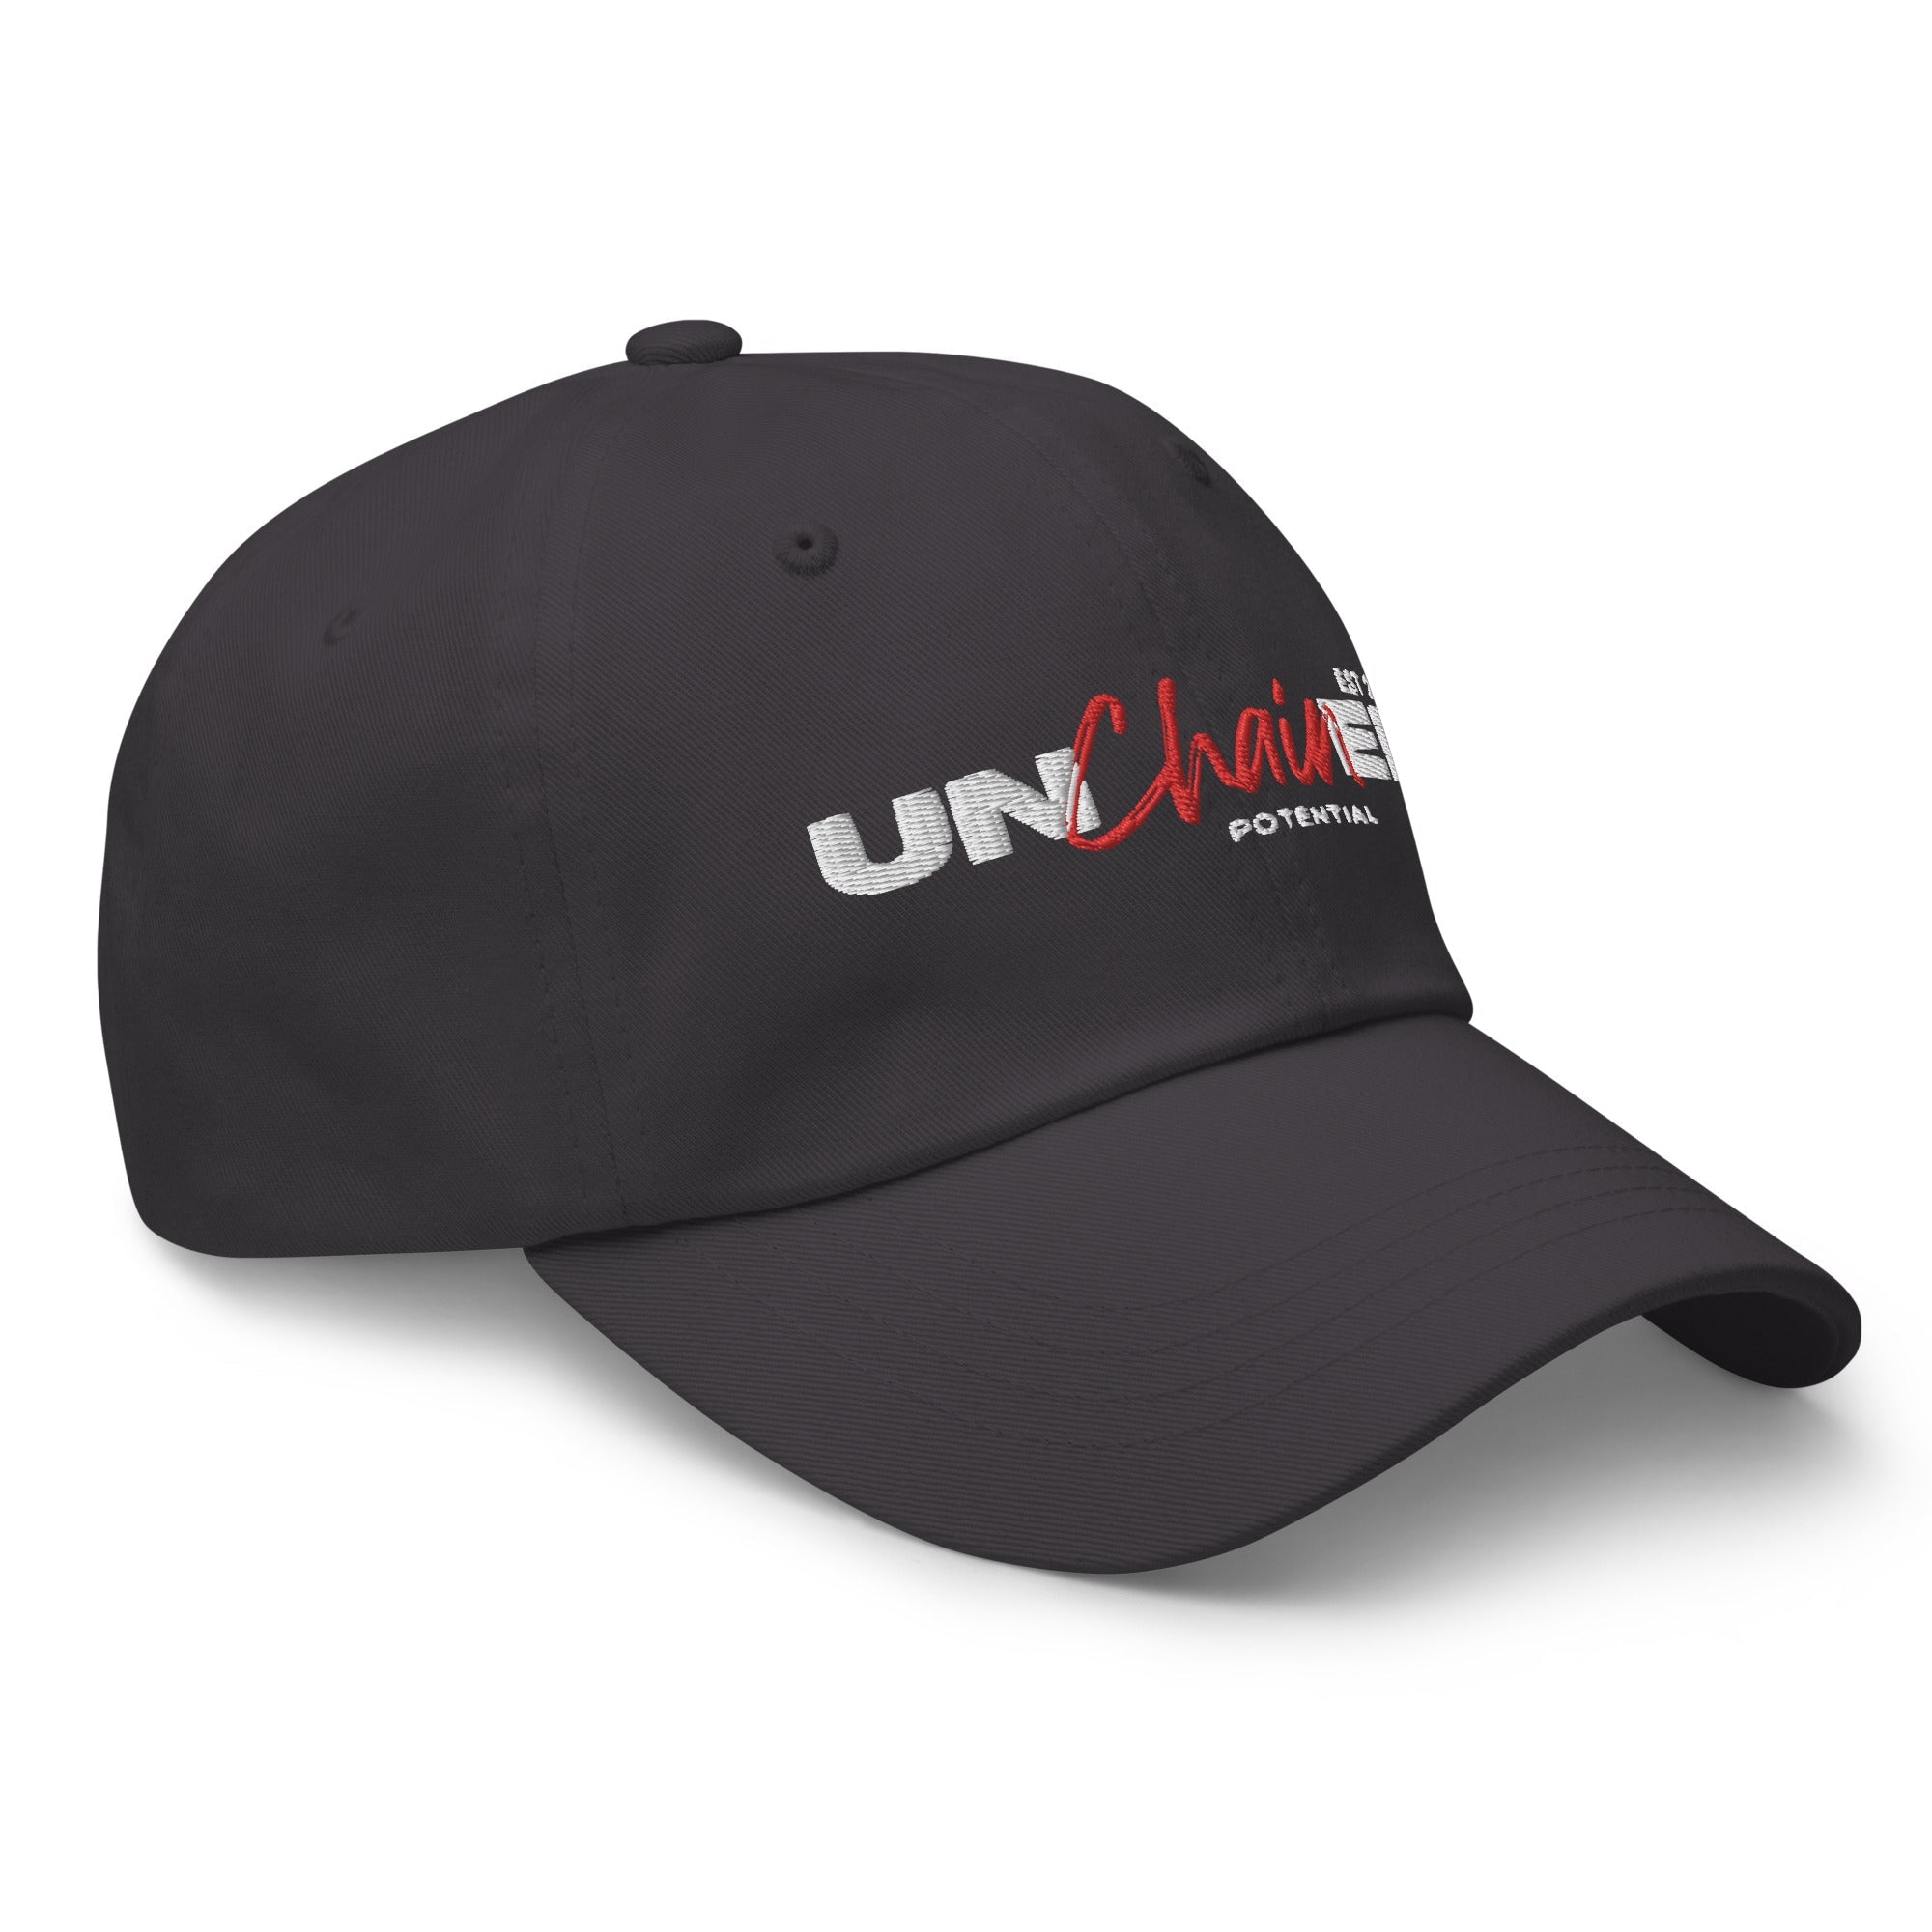 Unchained Potential Dad hat